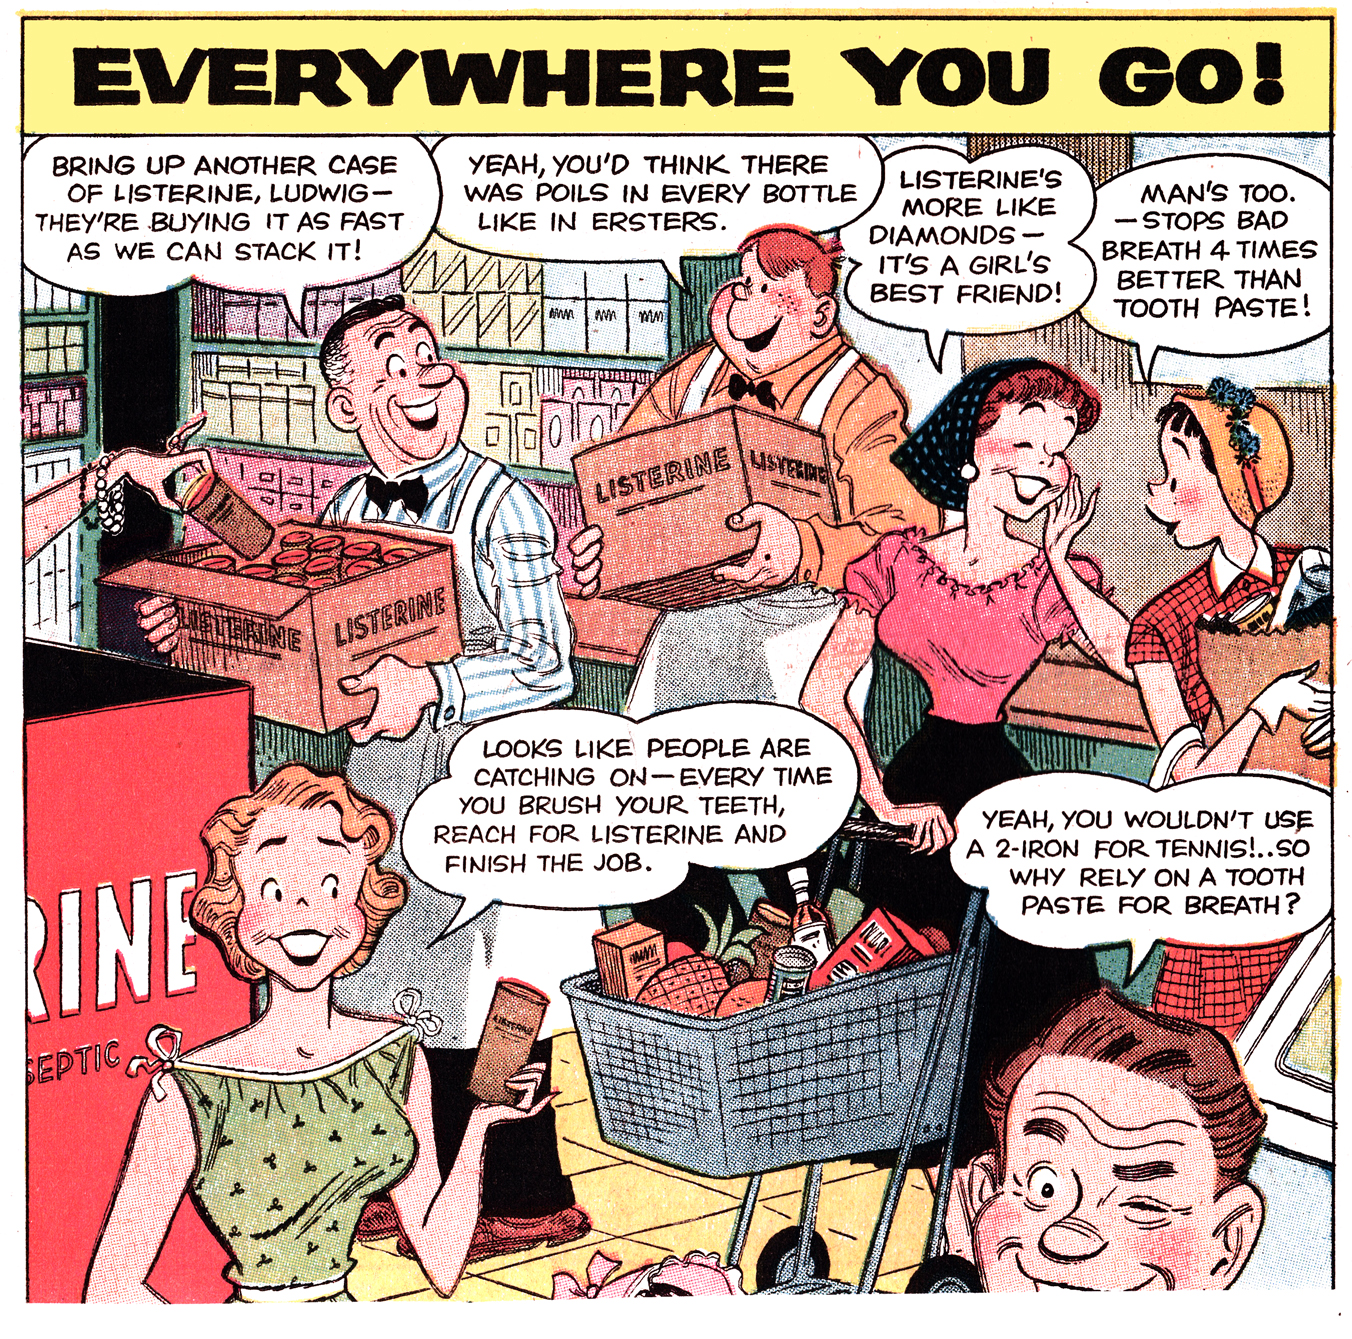 The Fabuleous Fifties: Everywhere You Look